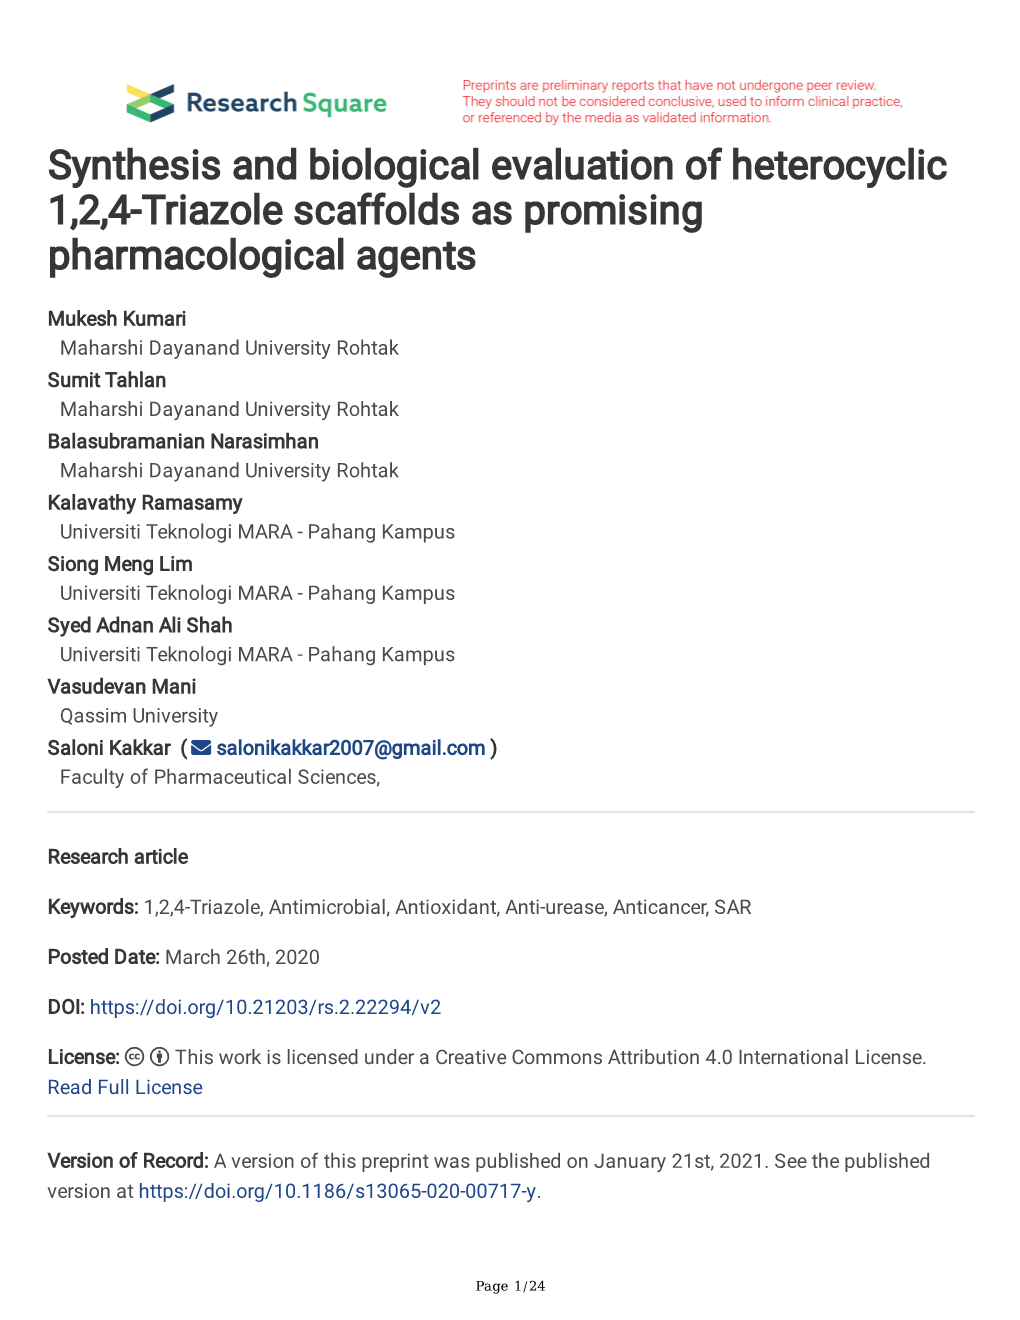 Synthesis and Biological Evaluation of Heterocyclic 1,2,4-Triazole Scaffolds As Promising Pharmacological Agents